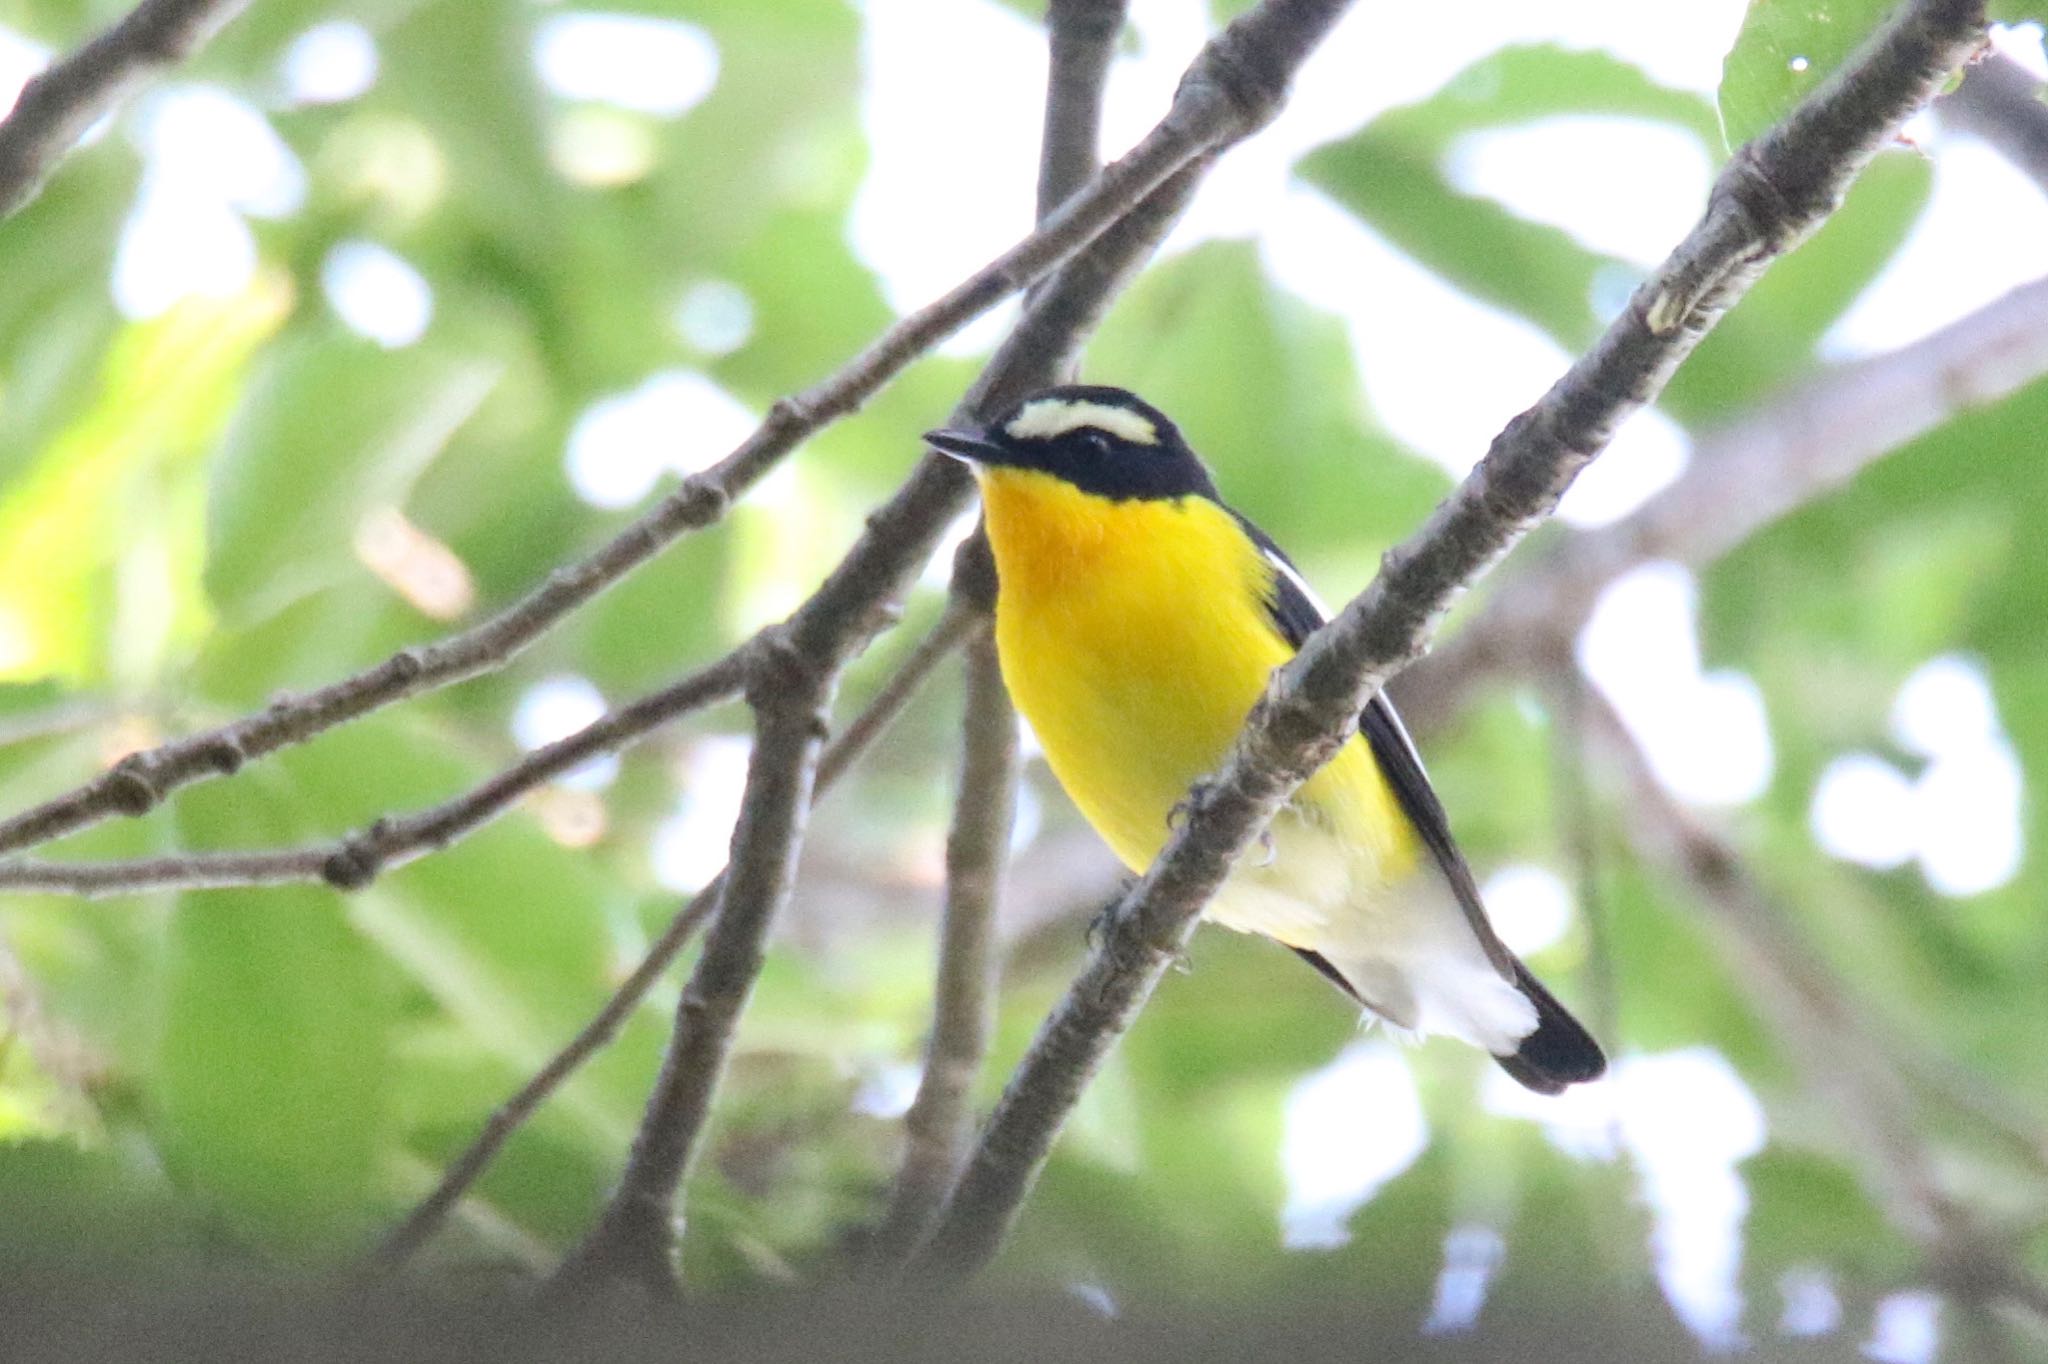 Photo of Yellow-rumped Flycatcher at 林試の森公園 by わたなべしん